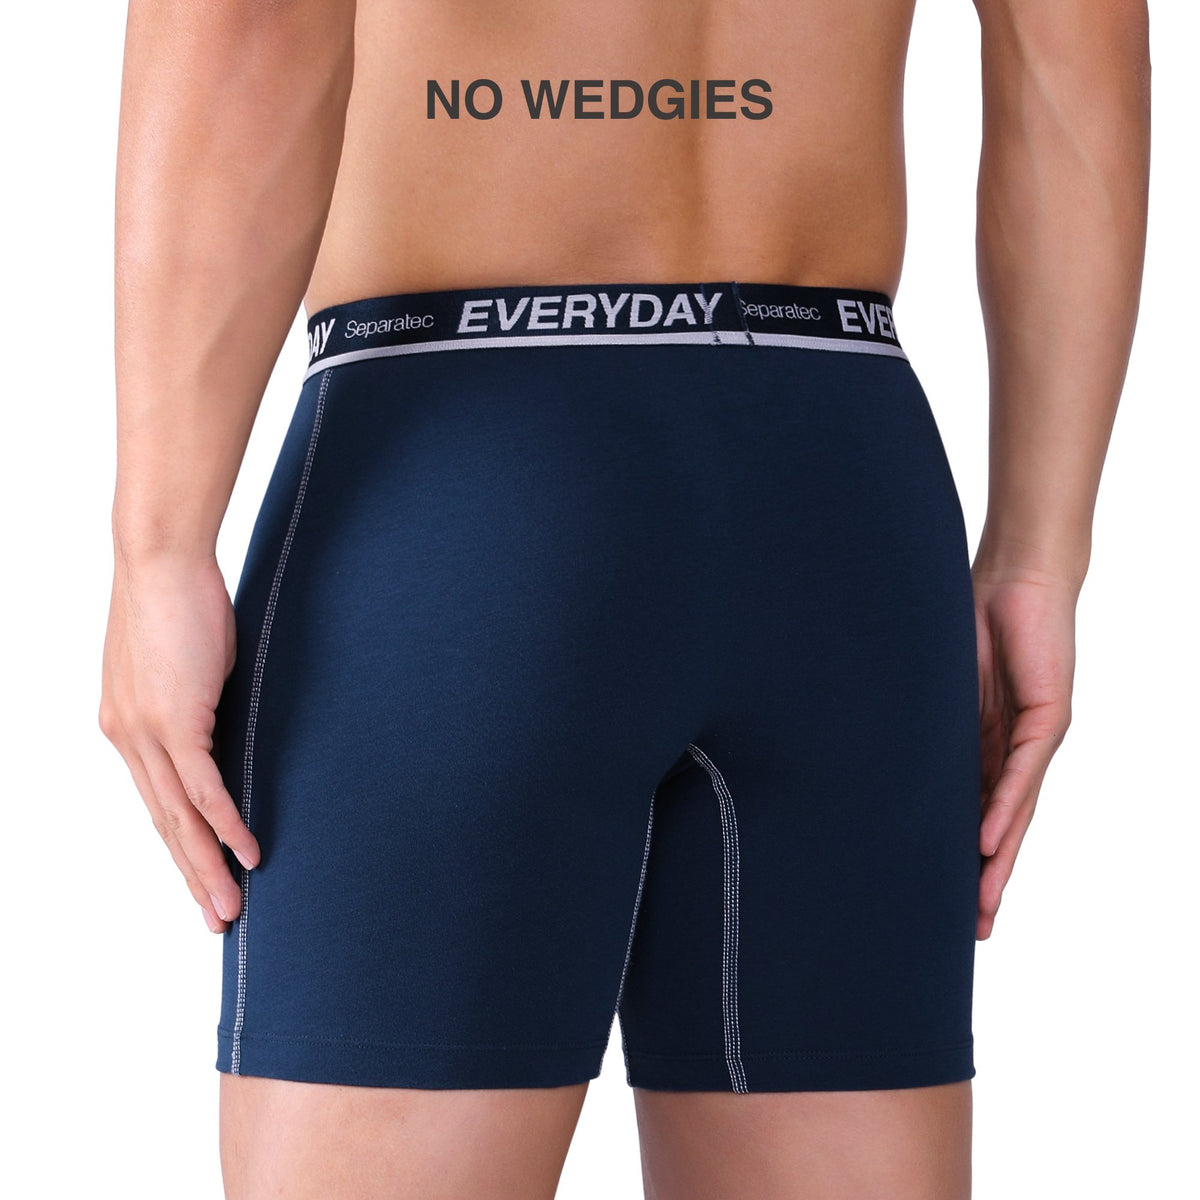 Separatec Underwear - Get Ready With Us: What's better than coming